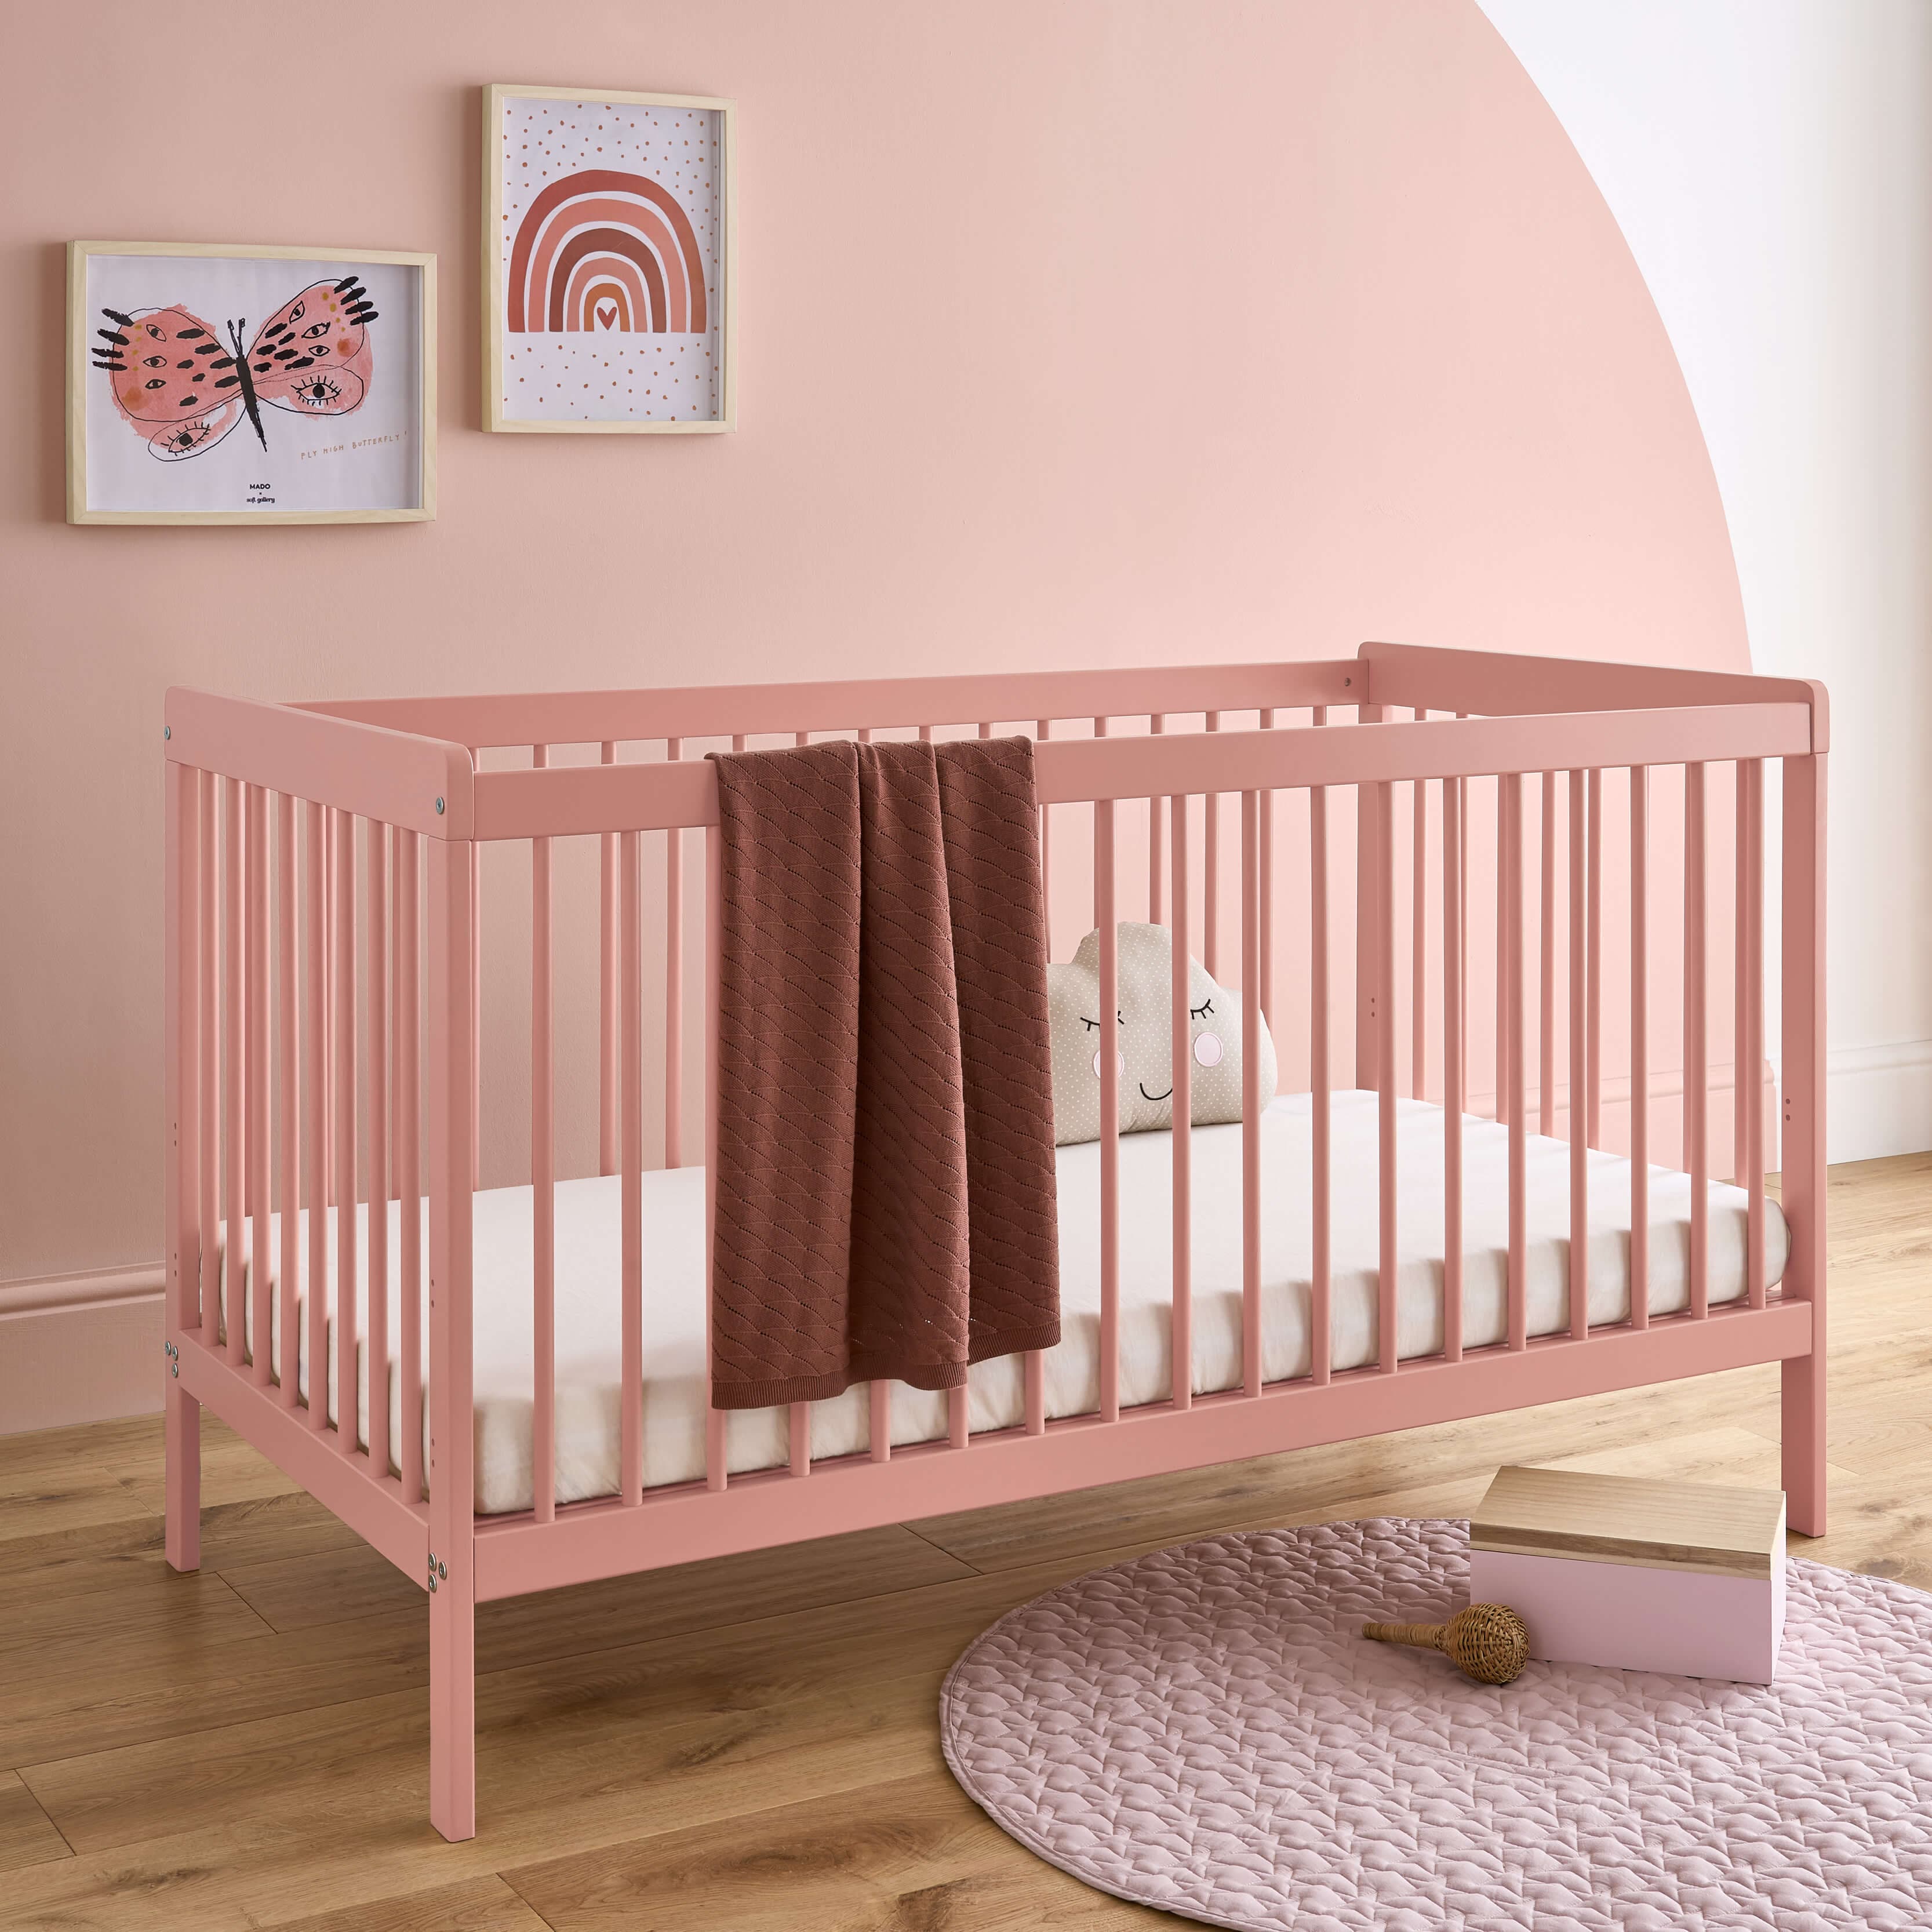 CuddleCo Nola Cot Bed in Soft Blush Cot Beds